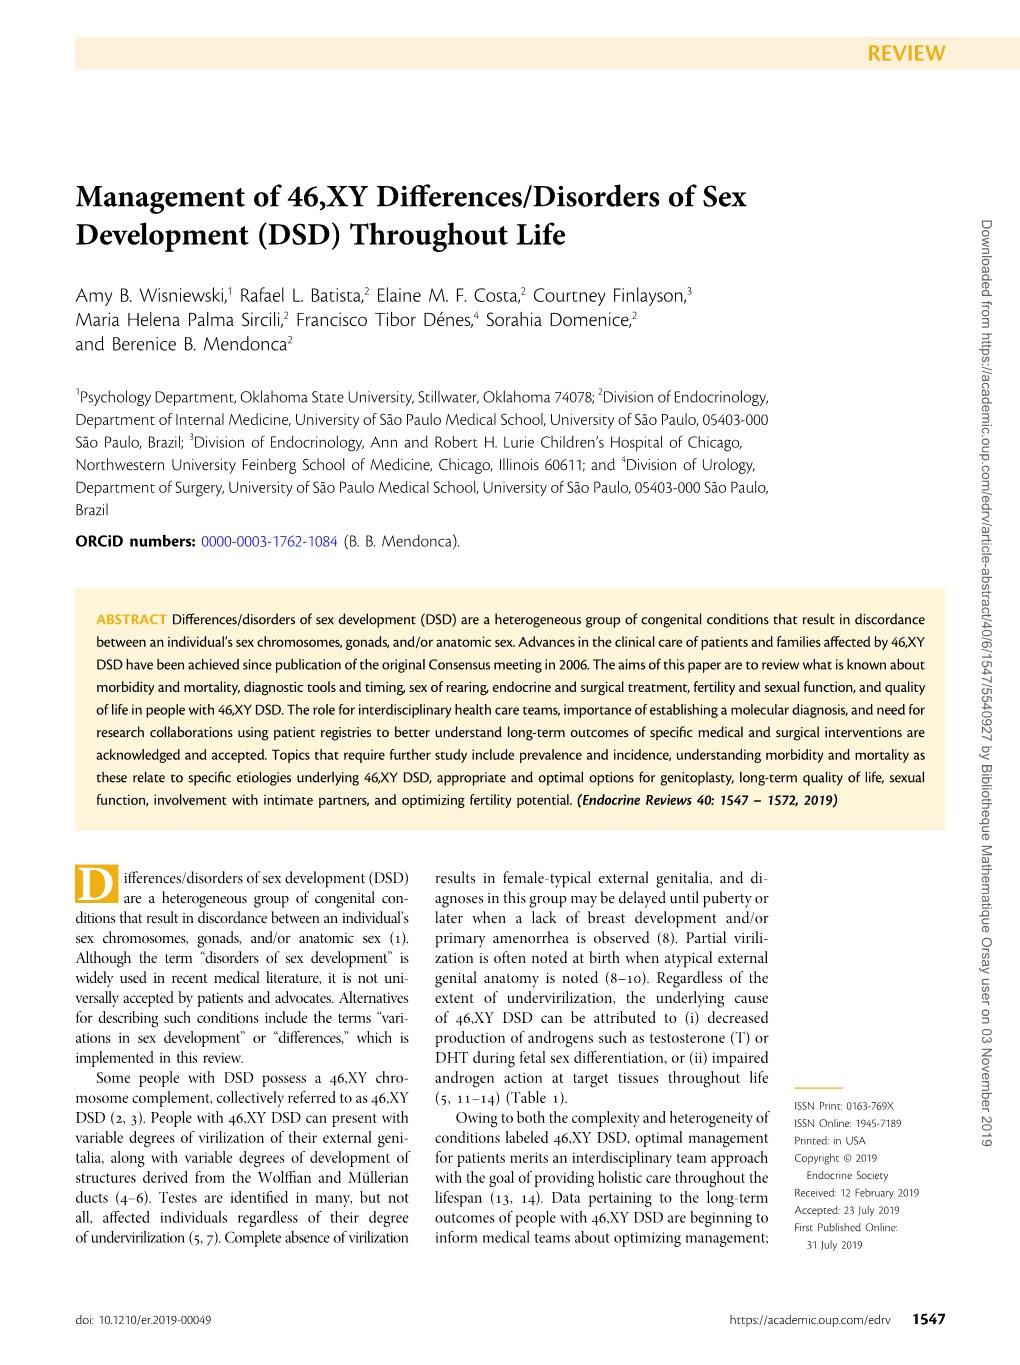 Management Of 46xy Differencesdisorders Of Sex Development Dsd 1434